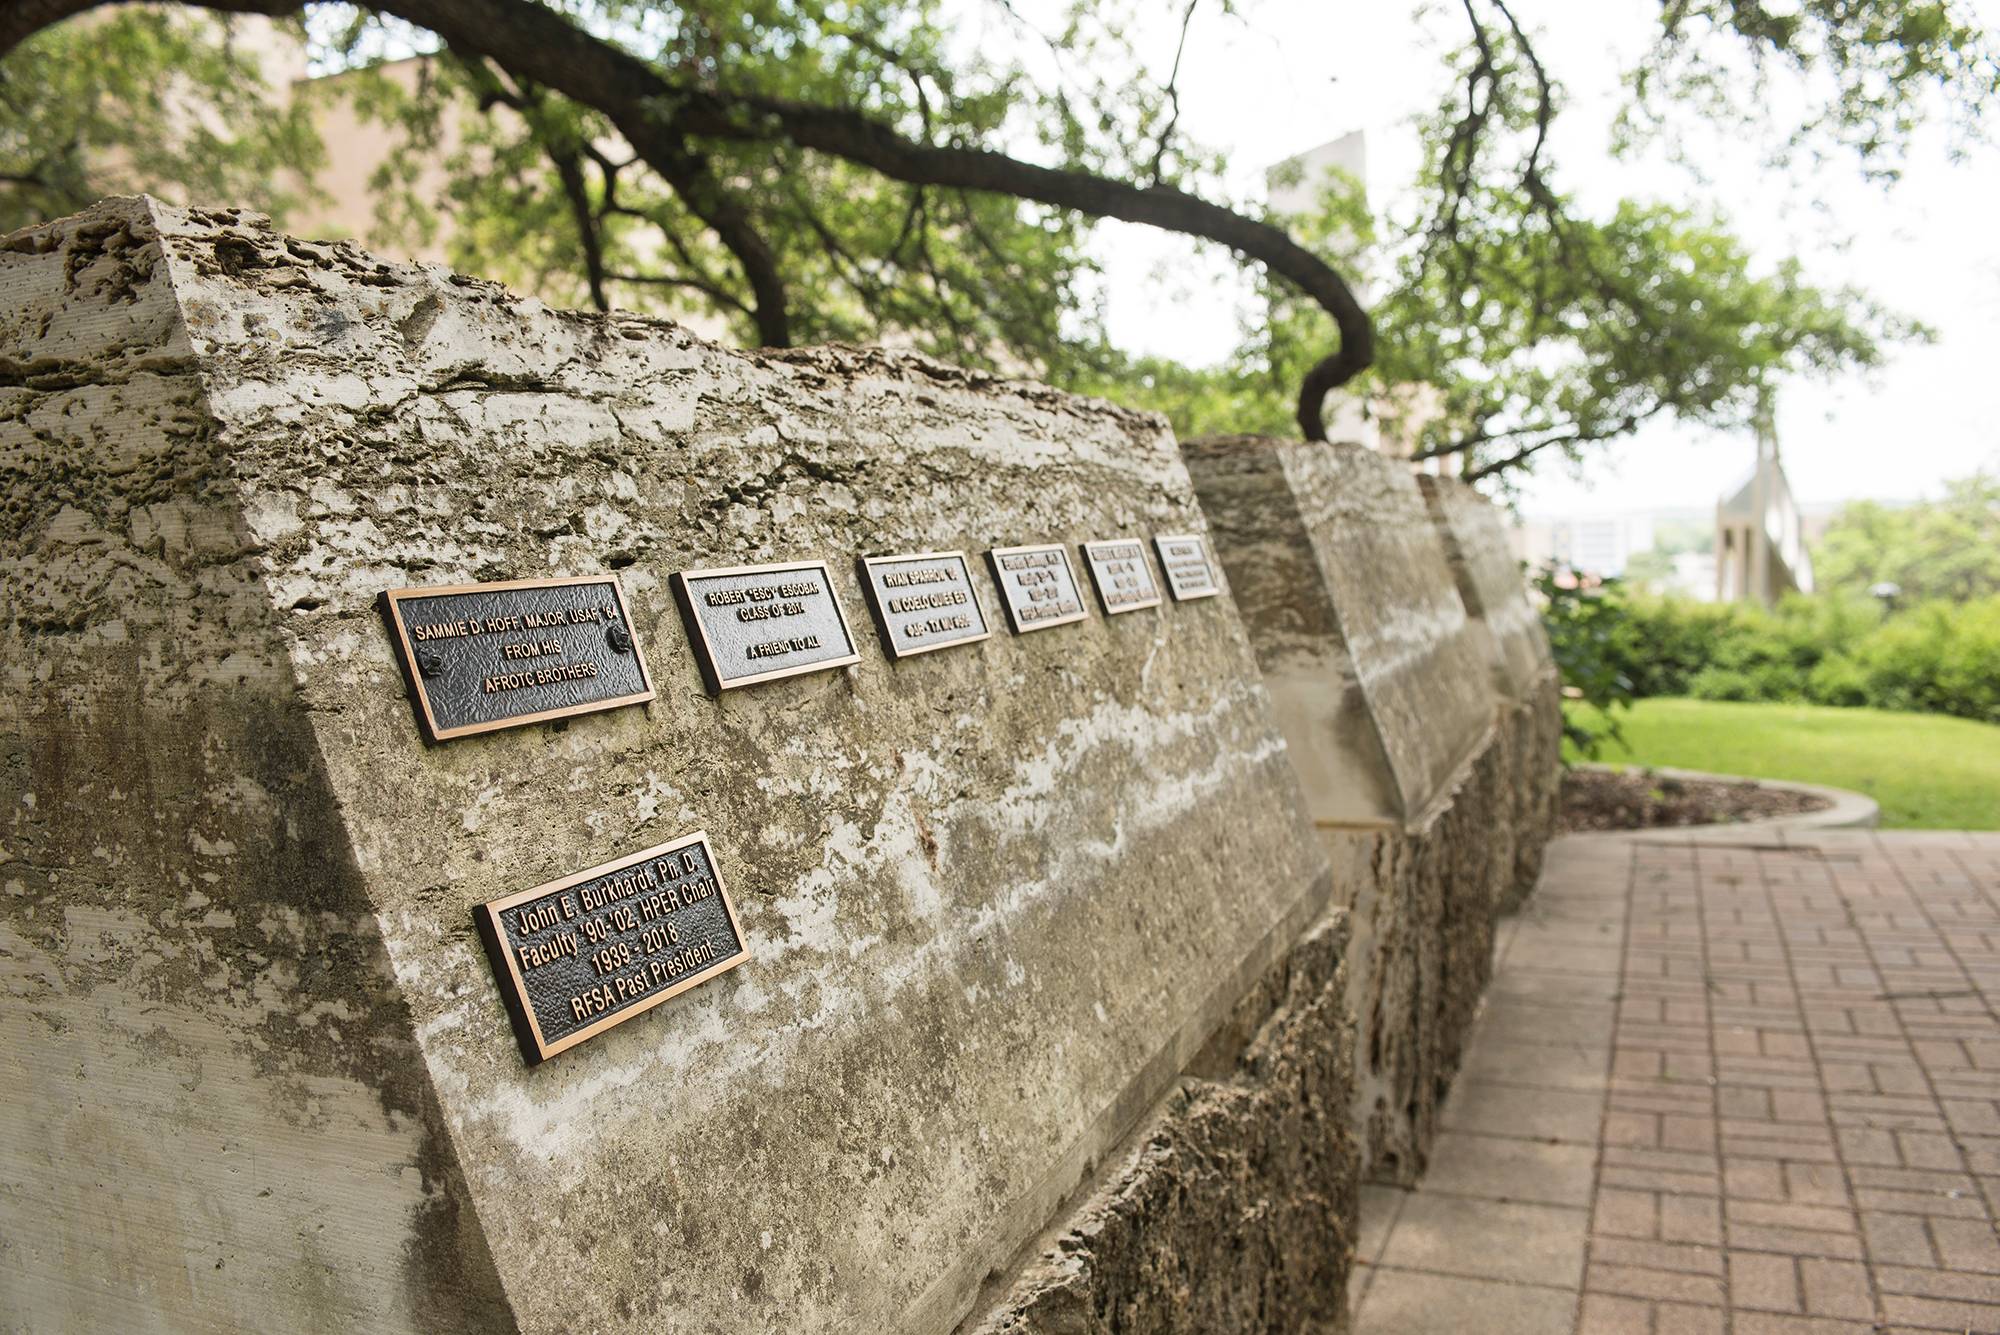 Plaques bearing the names of Bobcats who have passed are mounted on stone tablets.